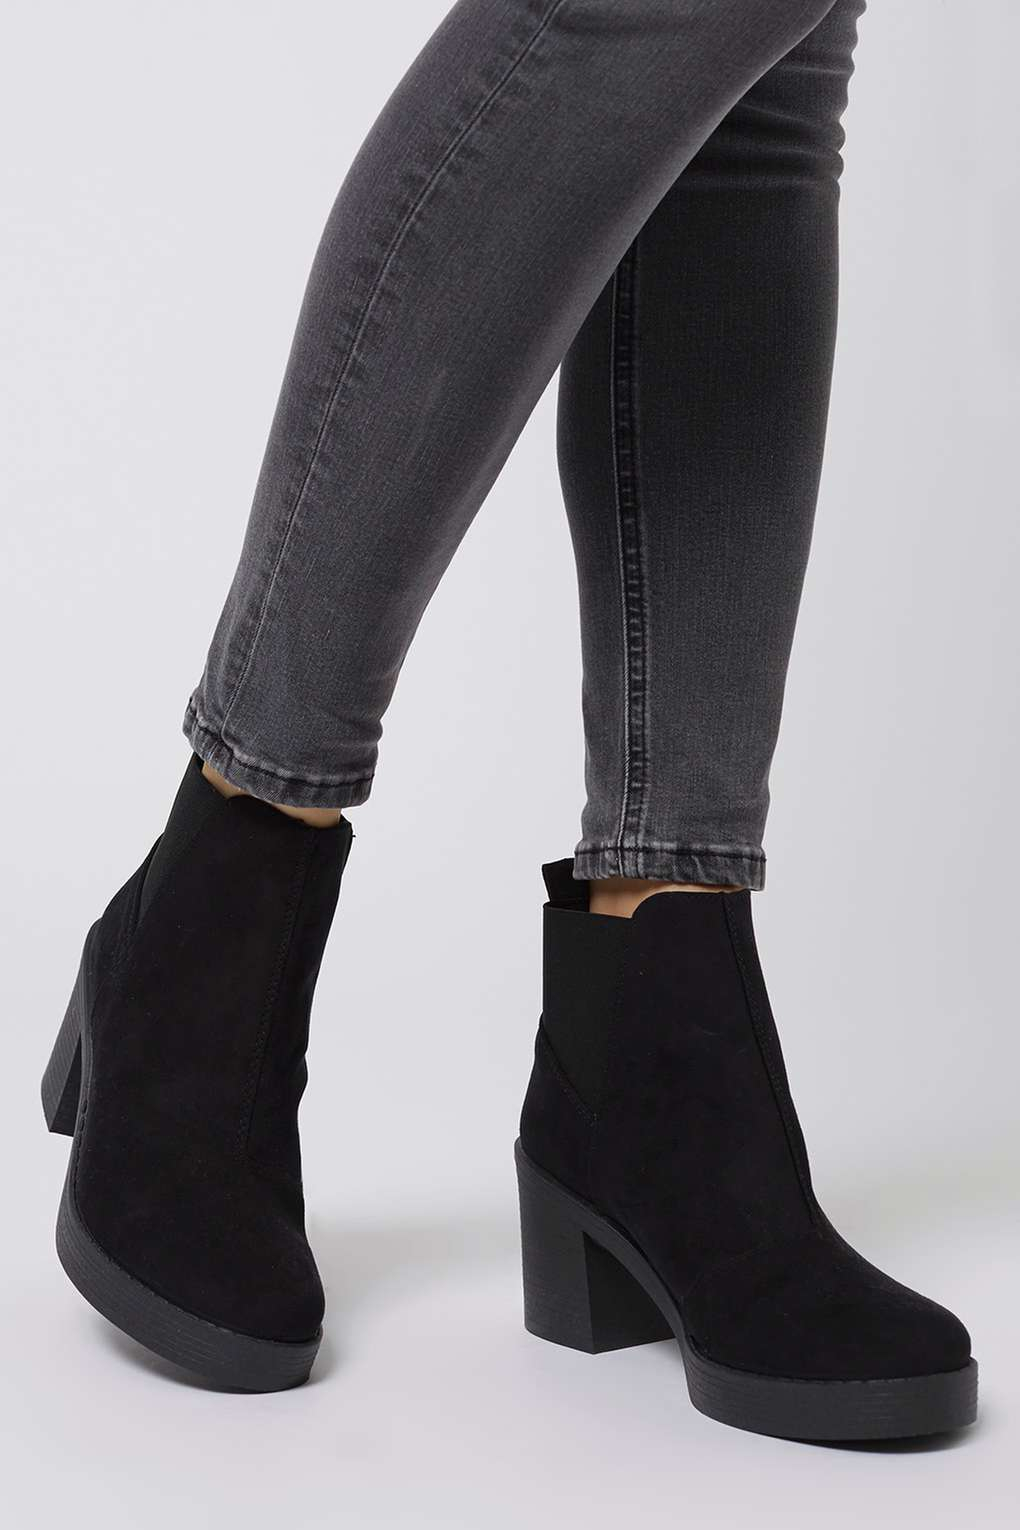 topshop bobby ankle boots,pasteurinstituteindia.com